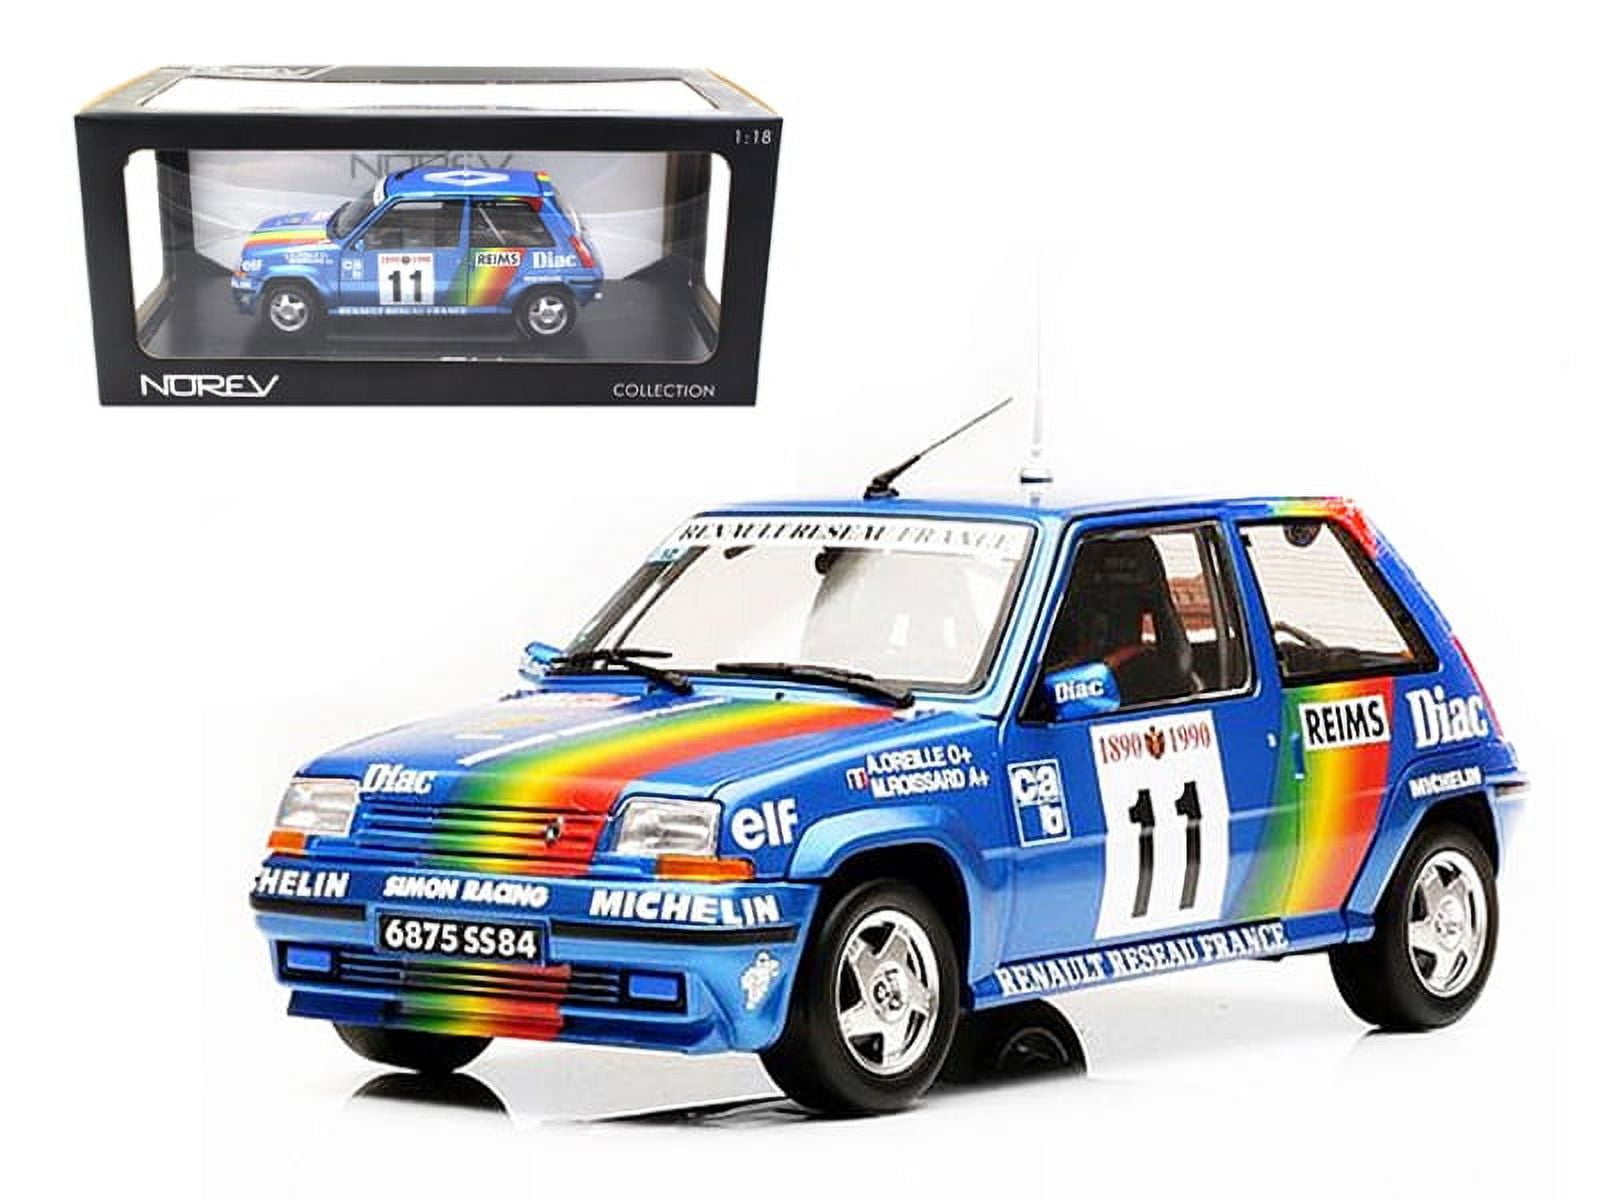 Renault 5 GT Turbo #11 1990 Rally Monte Carlo Oreille/Roissard 1/18 Diecast  Model Car by Norev